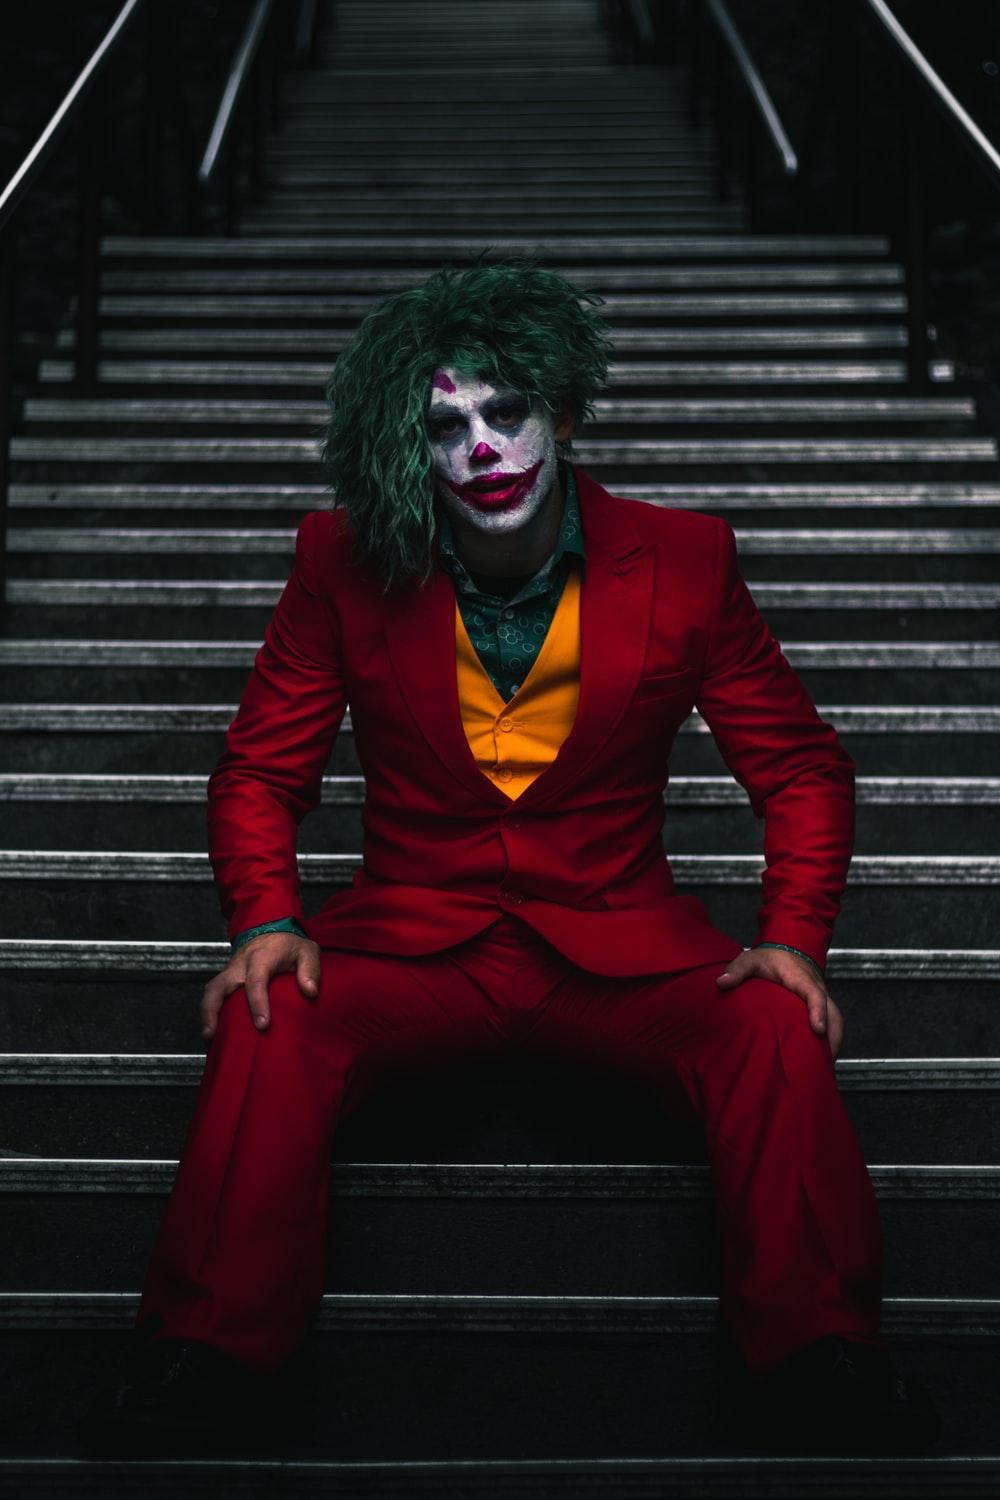 New Joker Picture. Download Free Image